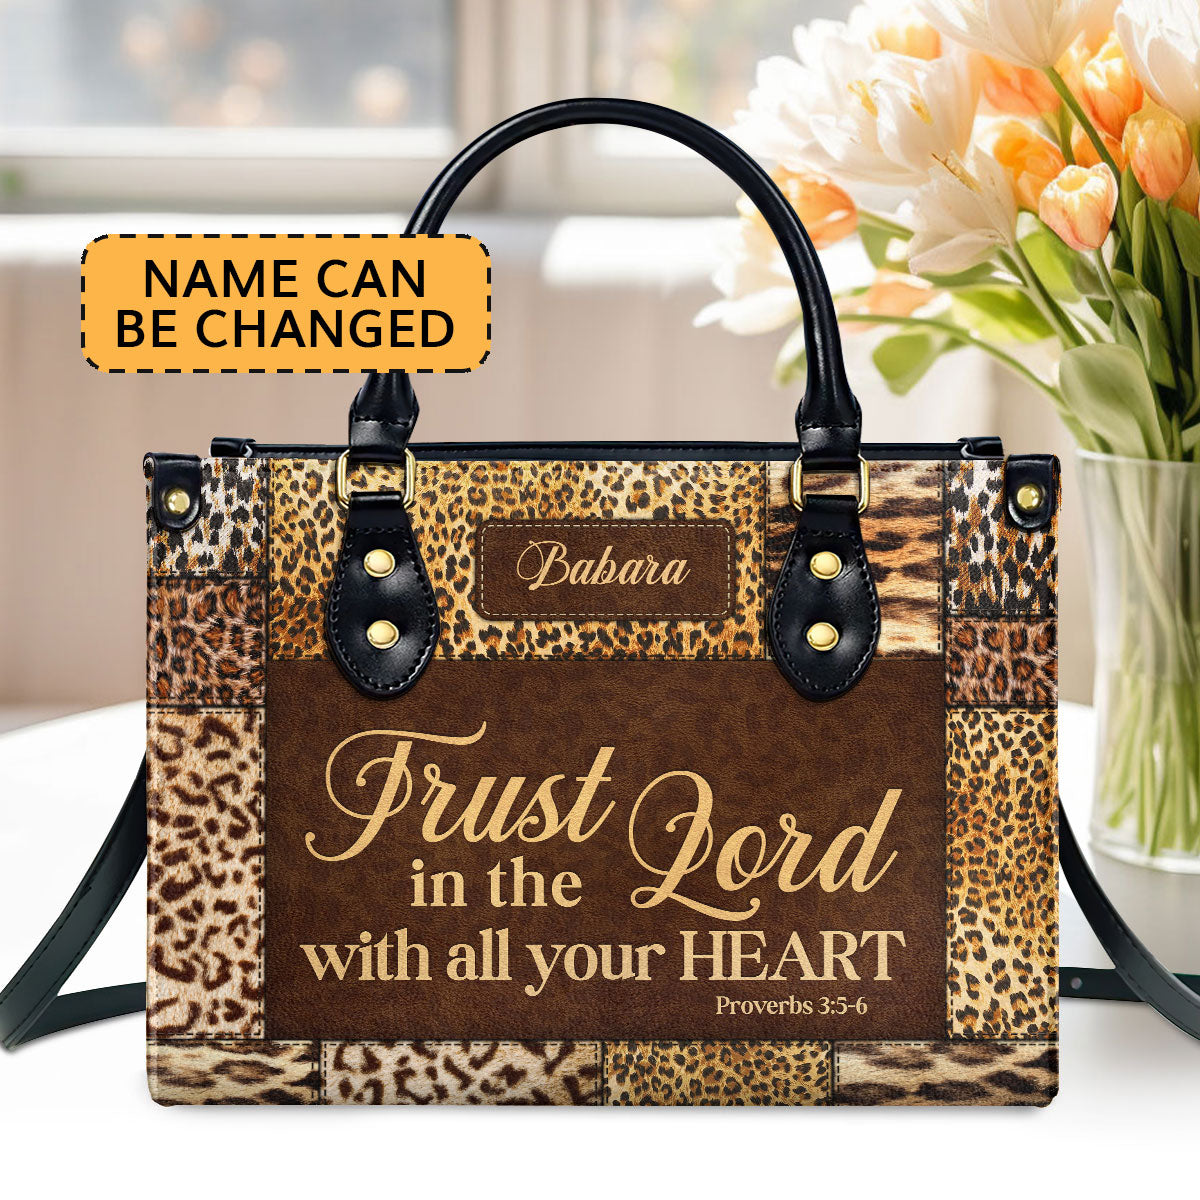 Trust In The Lord With All Your Heart Proverbs 35-6 Personalized Zippered Leather Handbag Psalm 3124 Inspirational Gift For Her